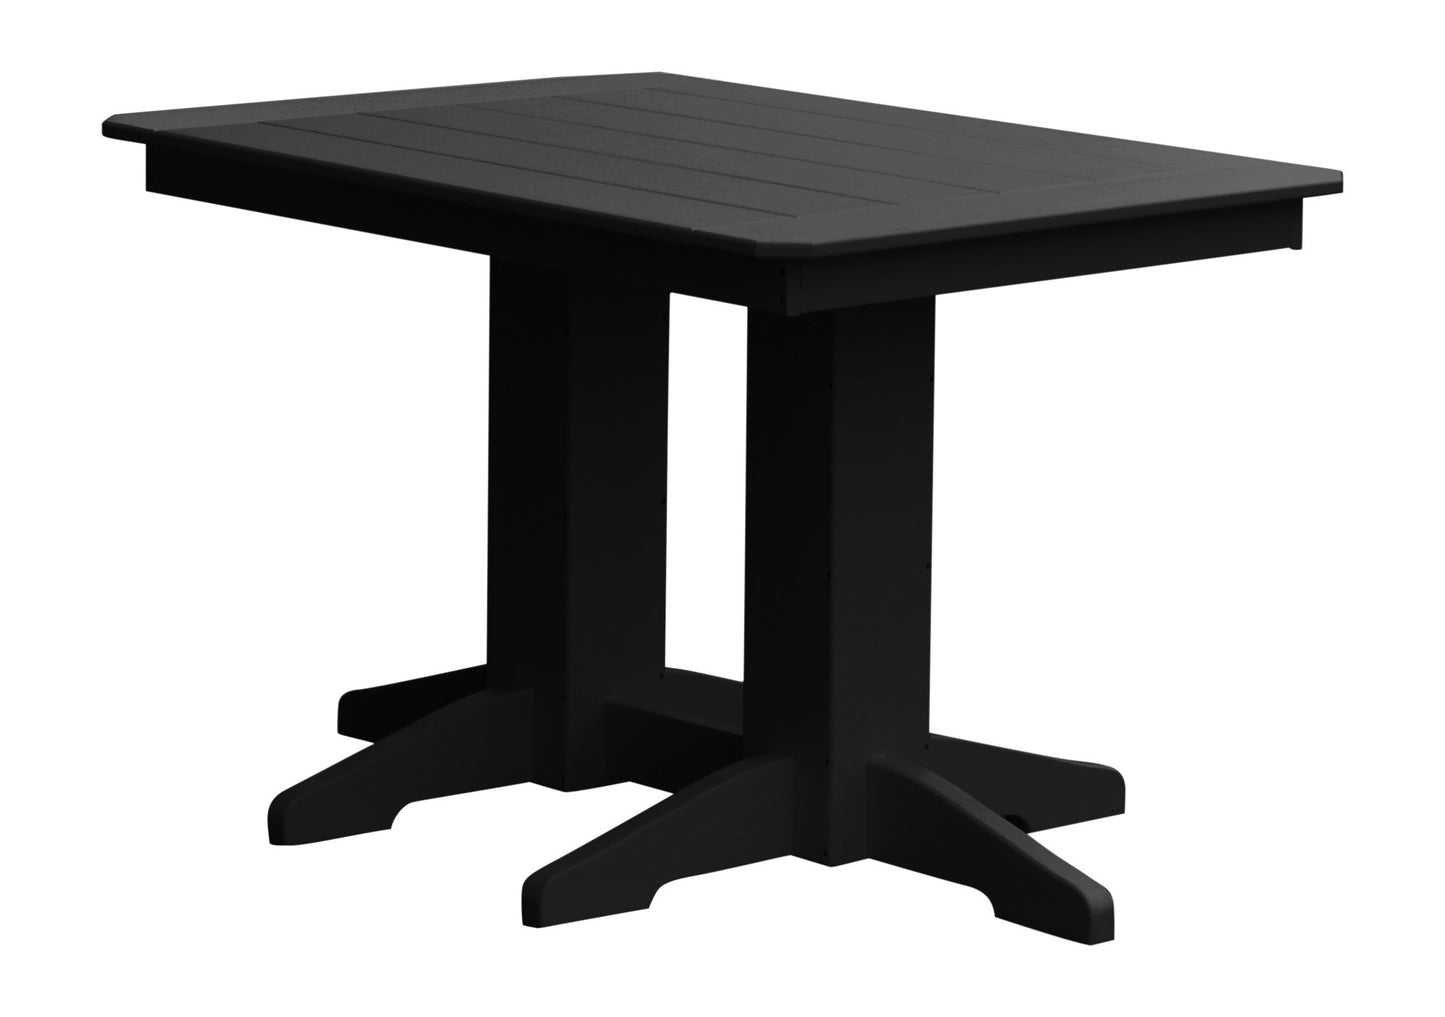 A&L Furniture Company Recycled Plastic 4' Dining Table - Black